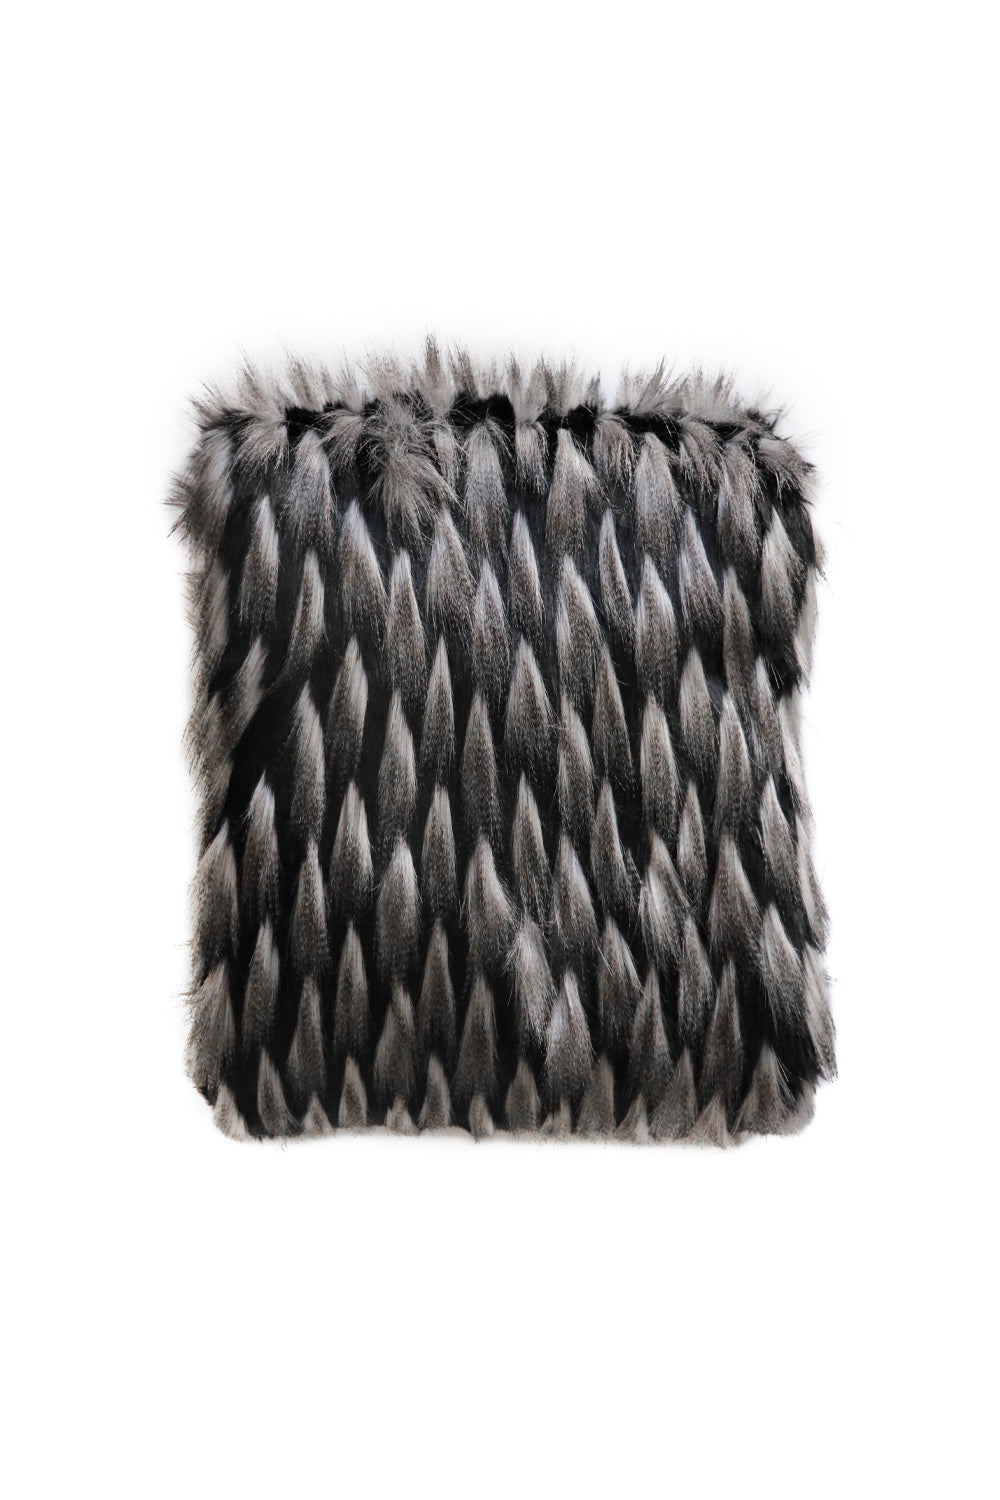 Imitation faux fur throw in Guinea Fowl from Heirloom